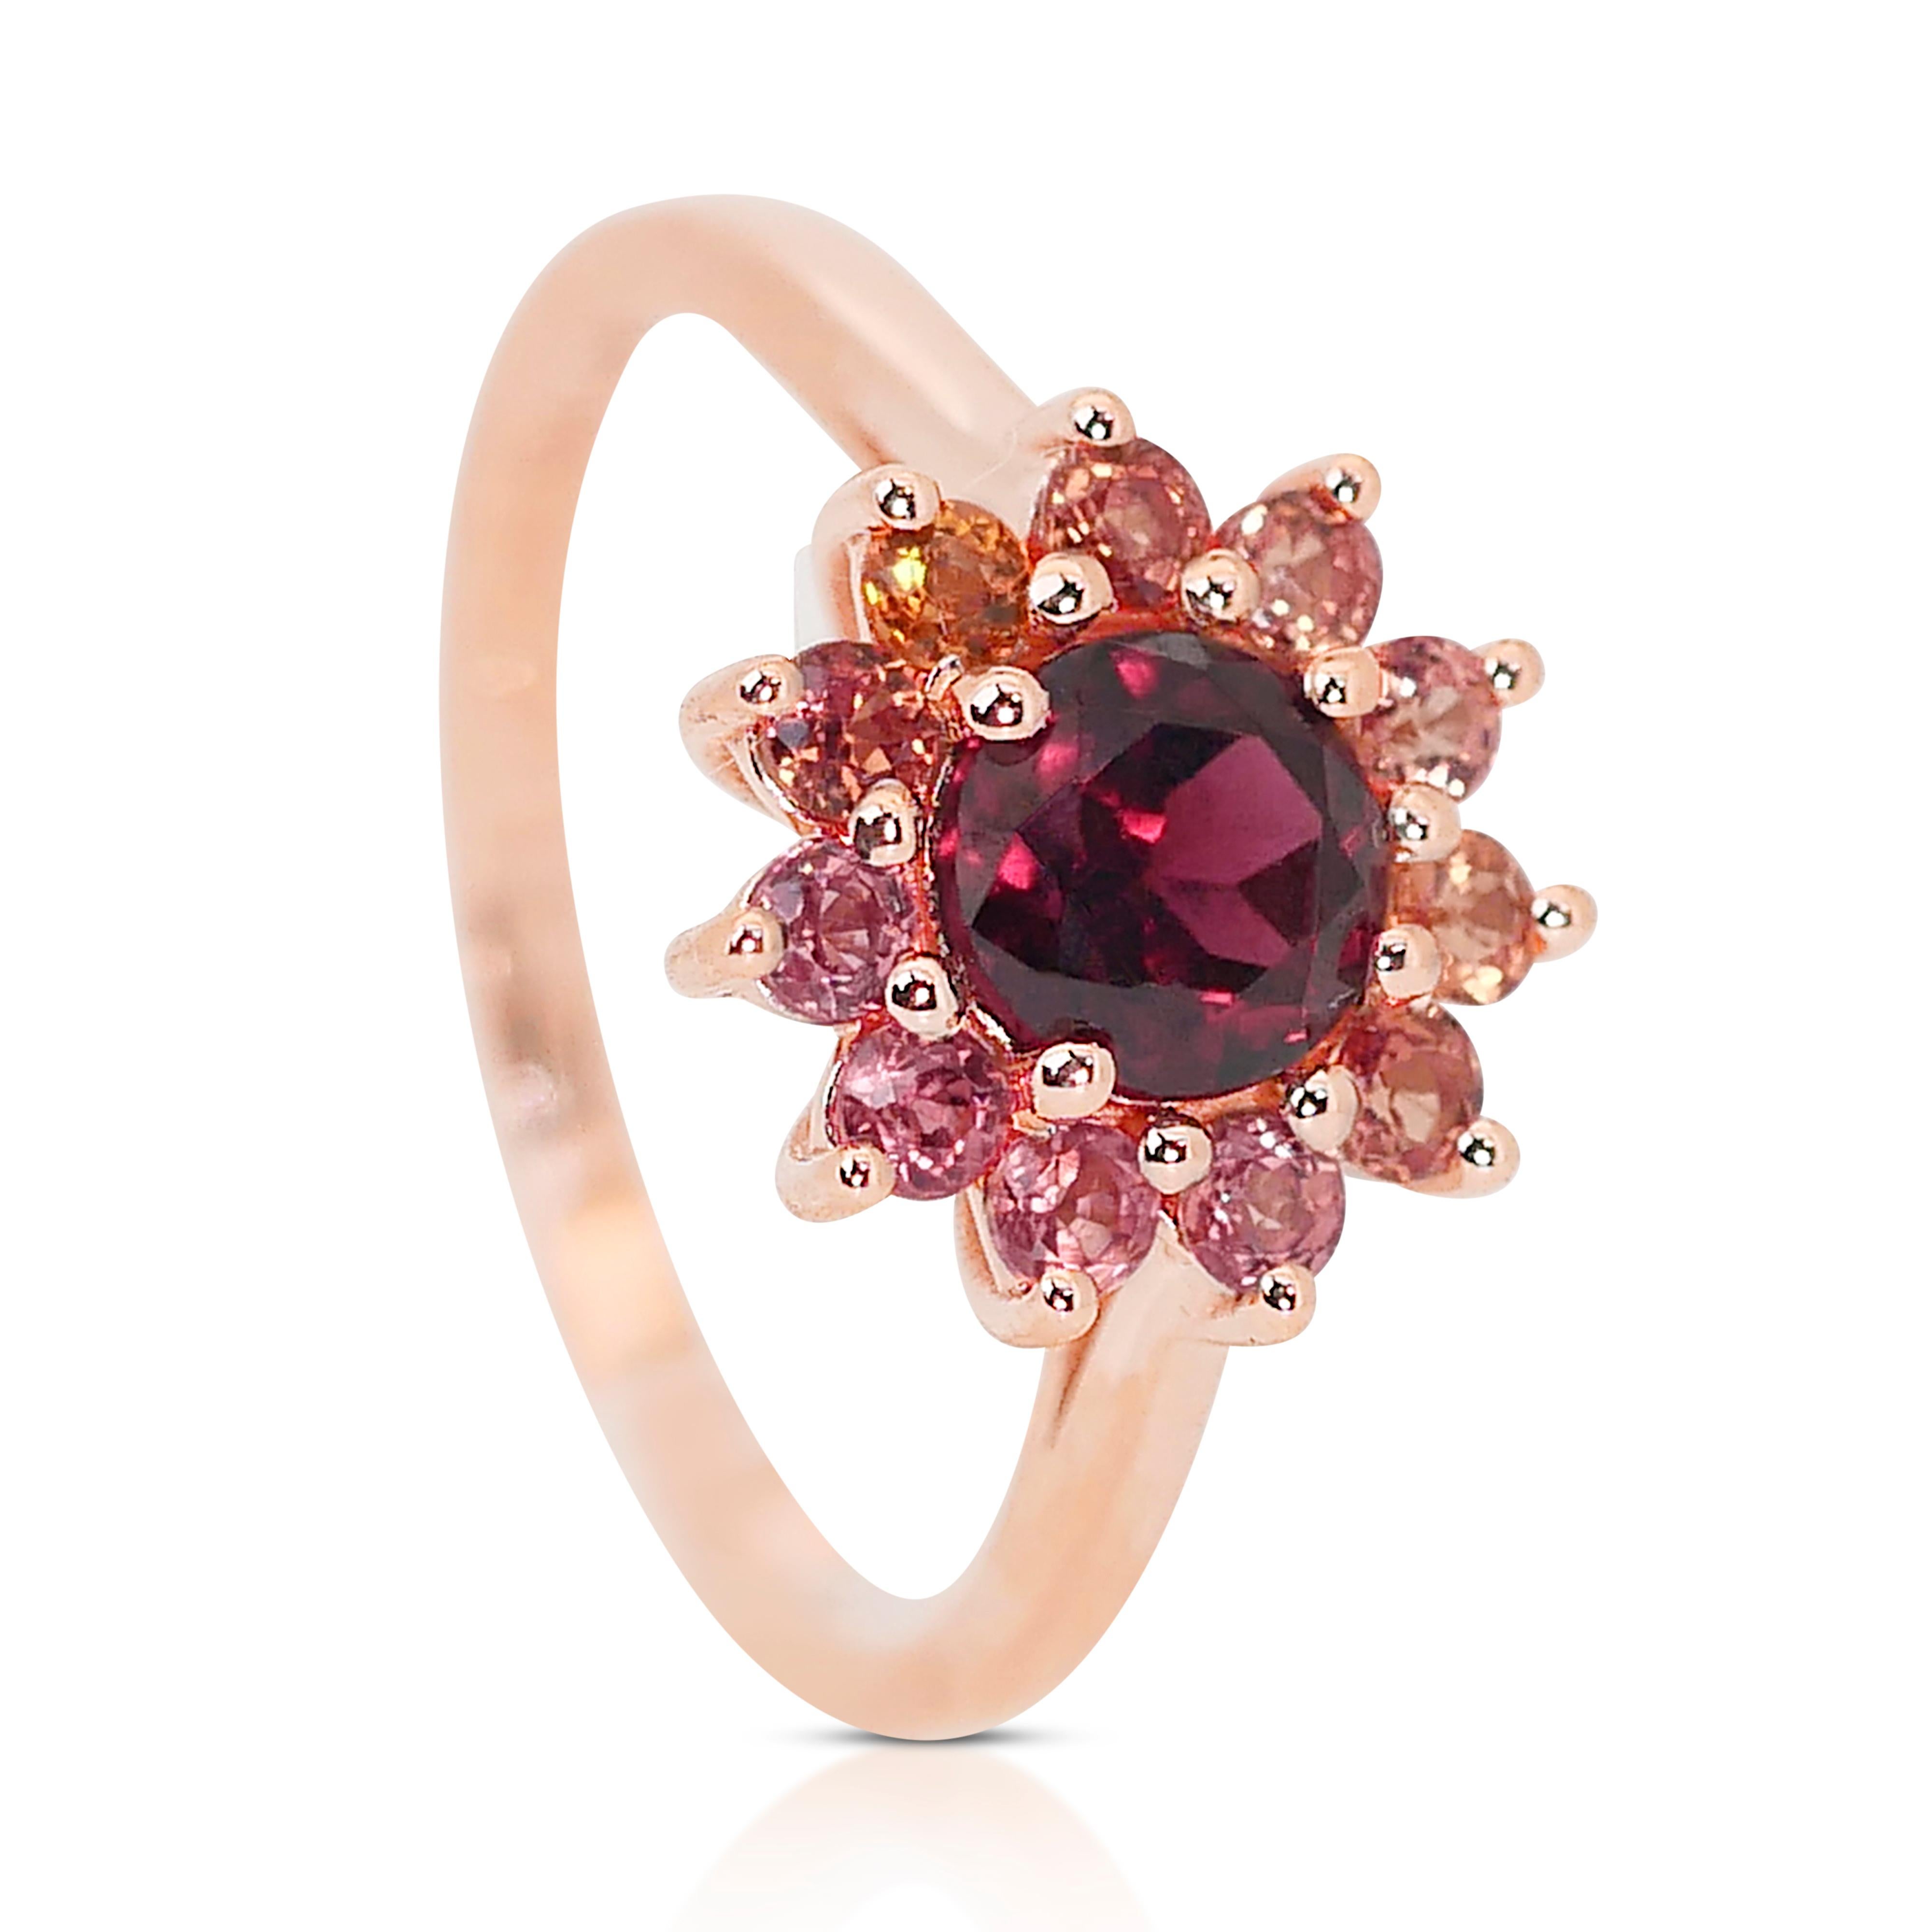 Radiant Passion: 1.20ct Round Garnet Centerpiece with 11 Garnet Side Stones - IGI Certified

A brilliant 1.20-carat round mixed cut garnet halo ring, radiating a rich and transparent red hue that captivates the senses. The main stone, set in